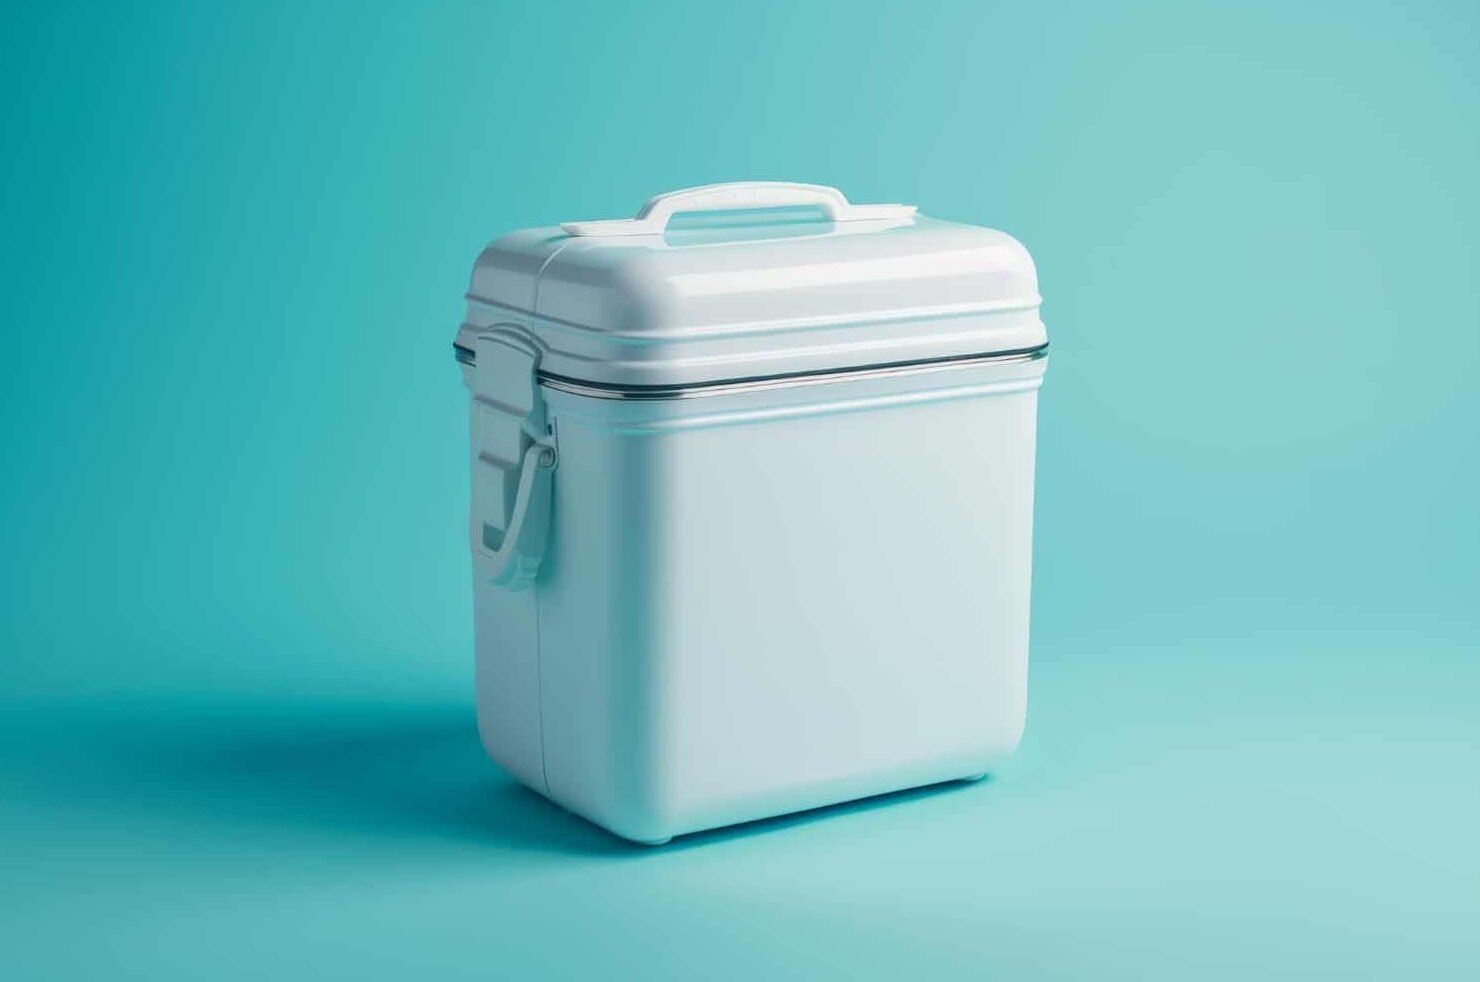 Stay Cool With Igloo Coolers’ Durable Outdoor Solutions